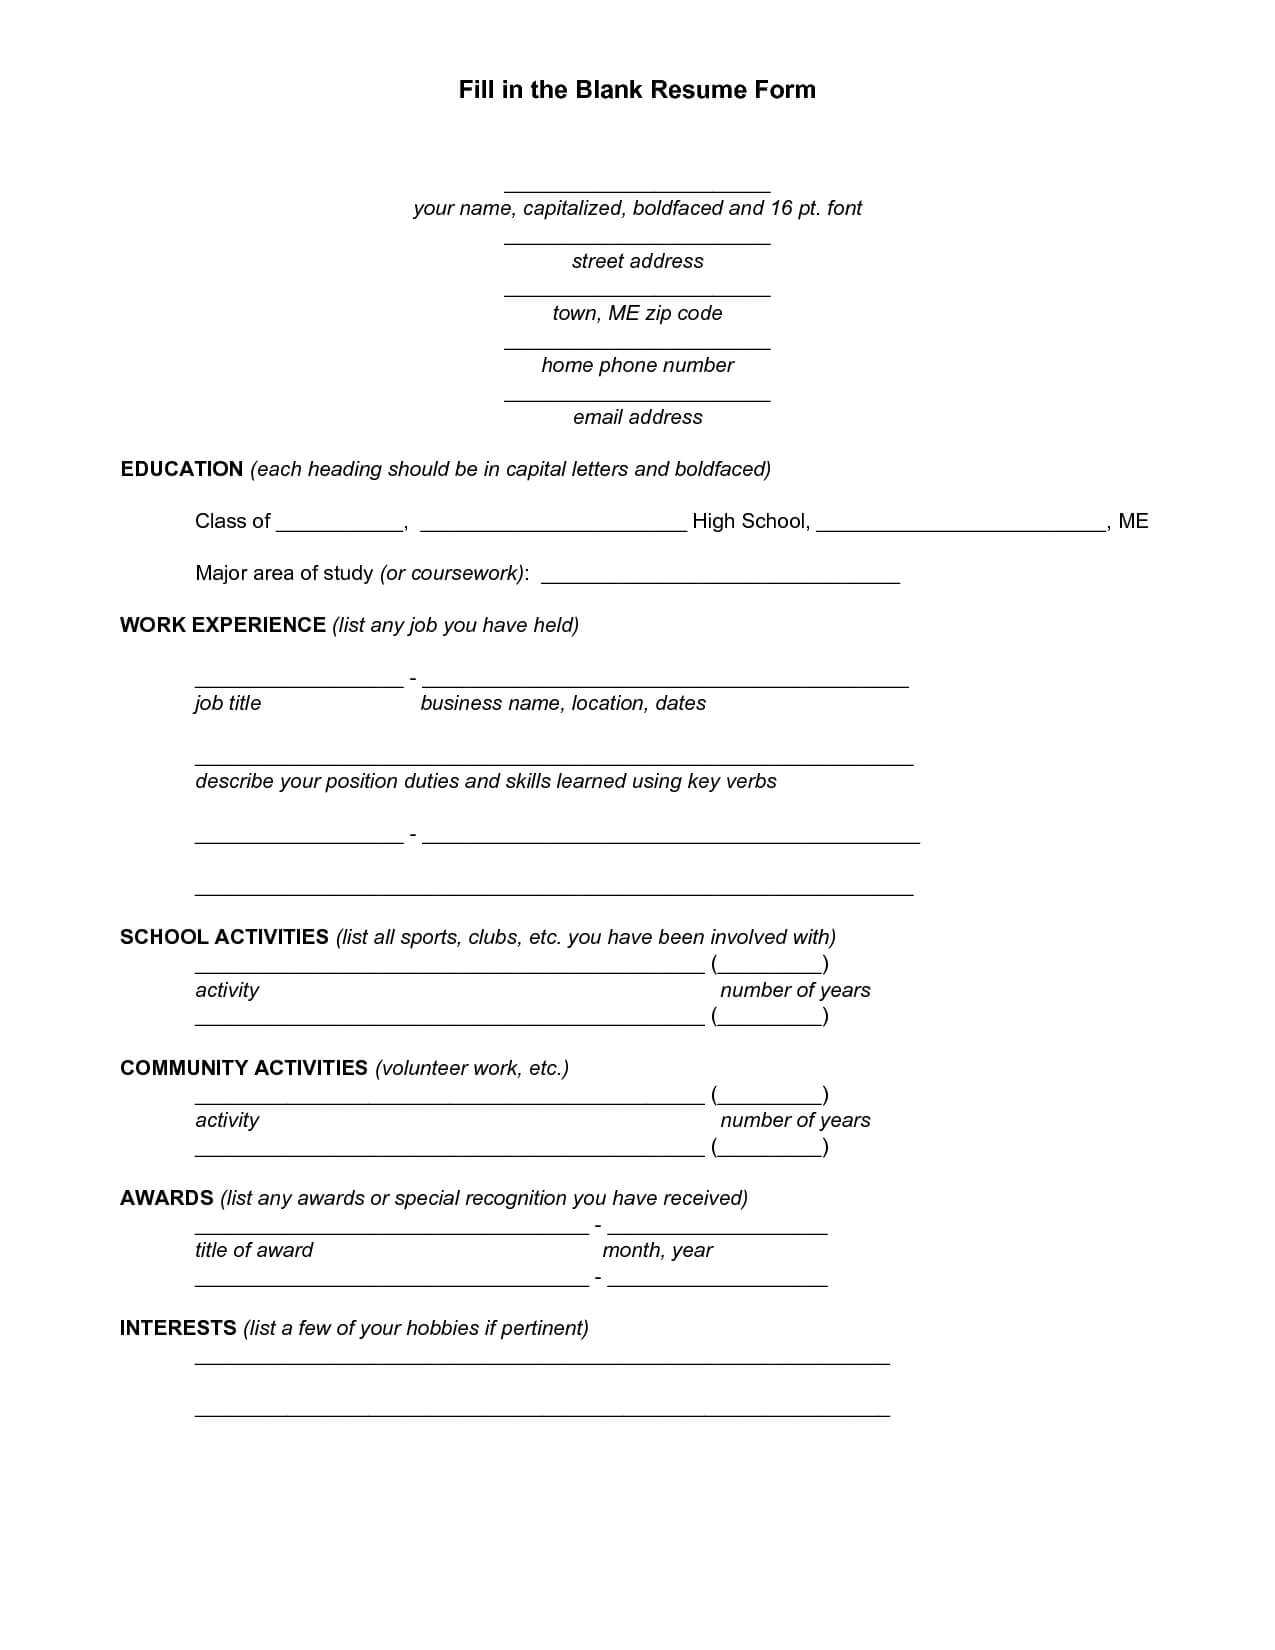 You Can Fill In | Student Resume, Resume Form, Job Resume For Free Blank Cv Template Download